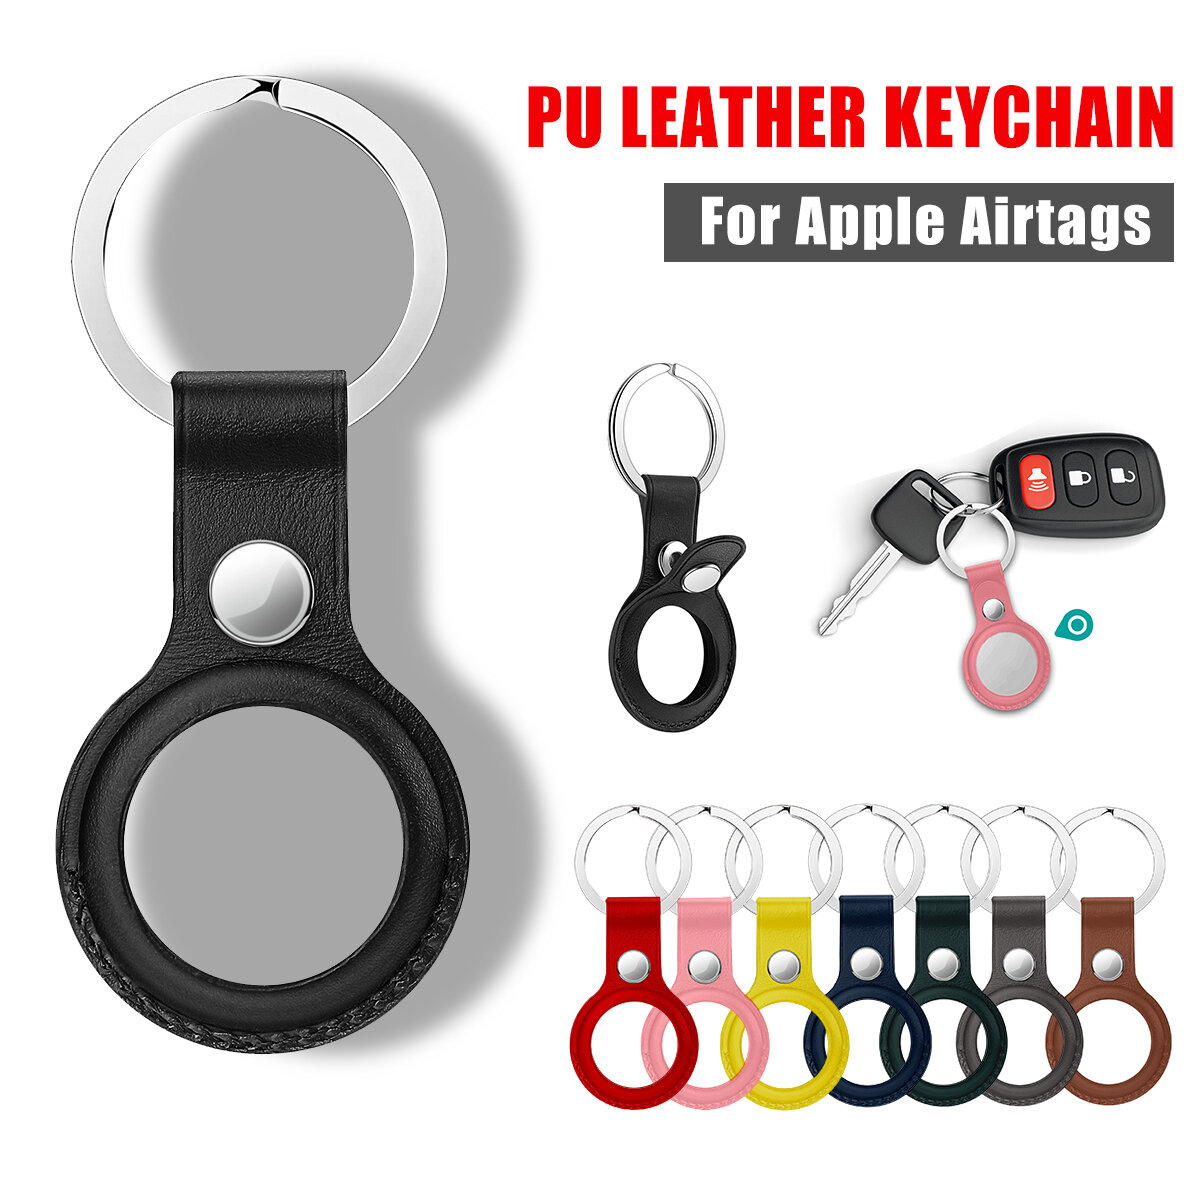 Portable Pure PU Leather Protective Cover Sleeve with Keychain for Apple Airtags bluetooth Tracker